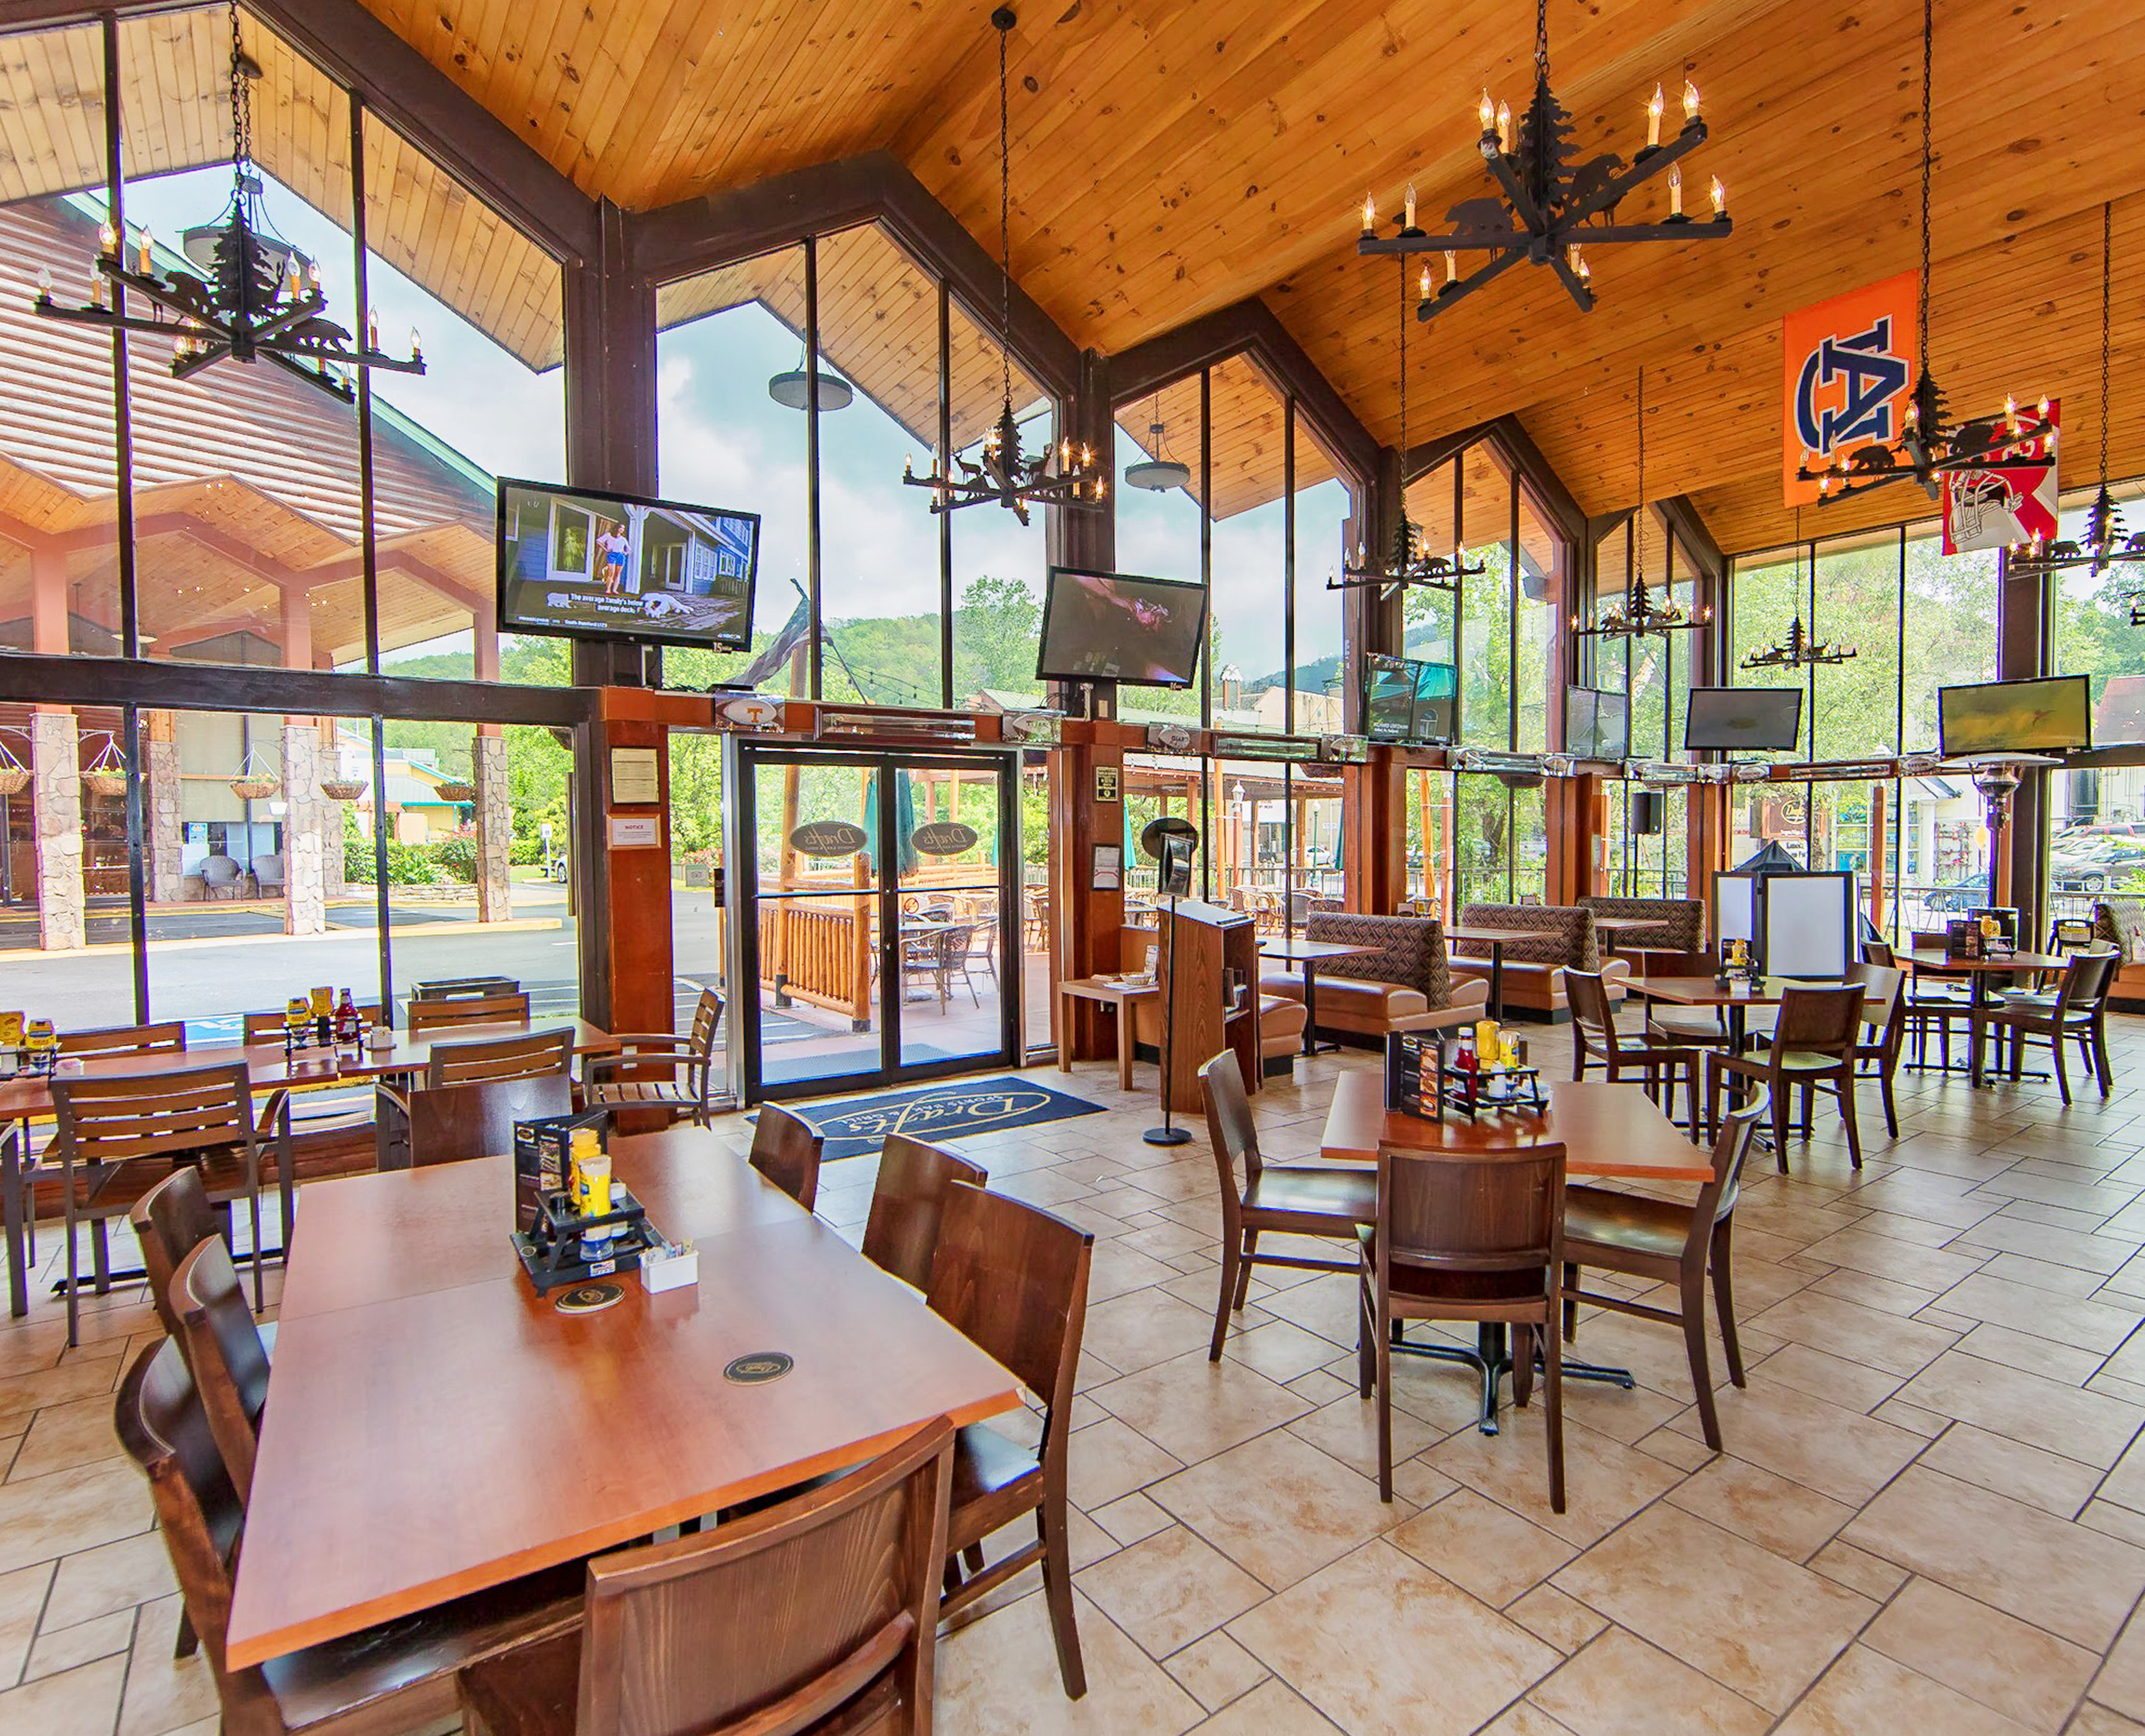 Burgers, flatbreads, steaks and salads on display at Drafts Sports Grill | River Terrace Resort & Convention Center | Westgate Resorts